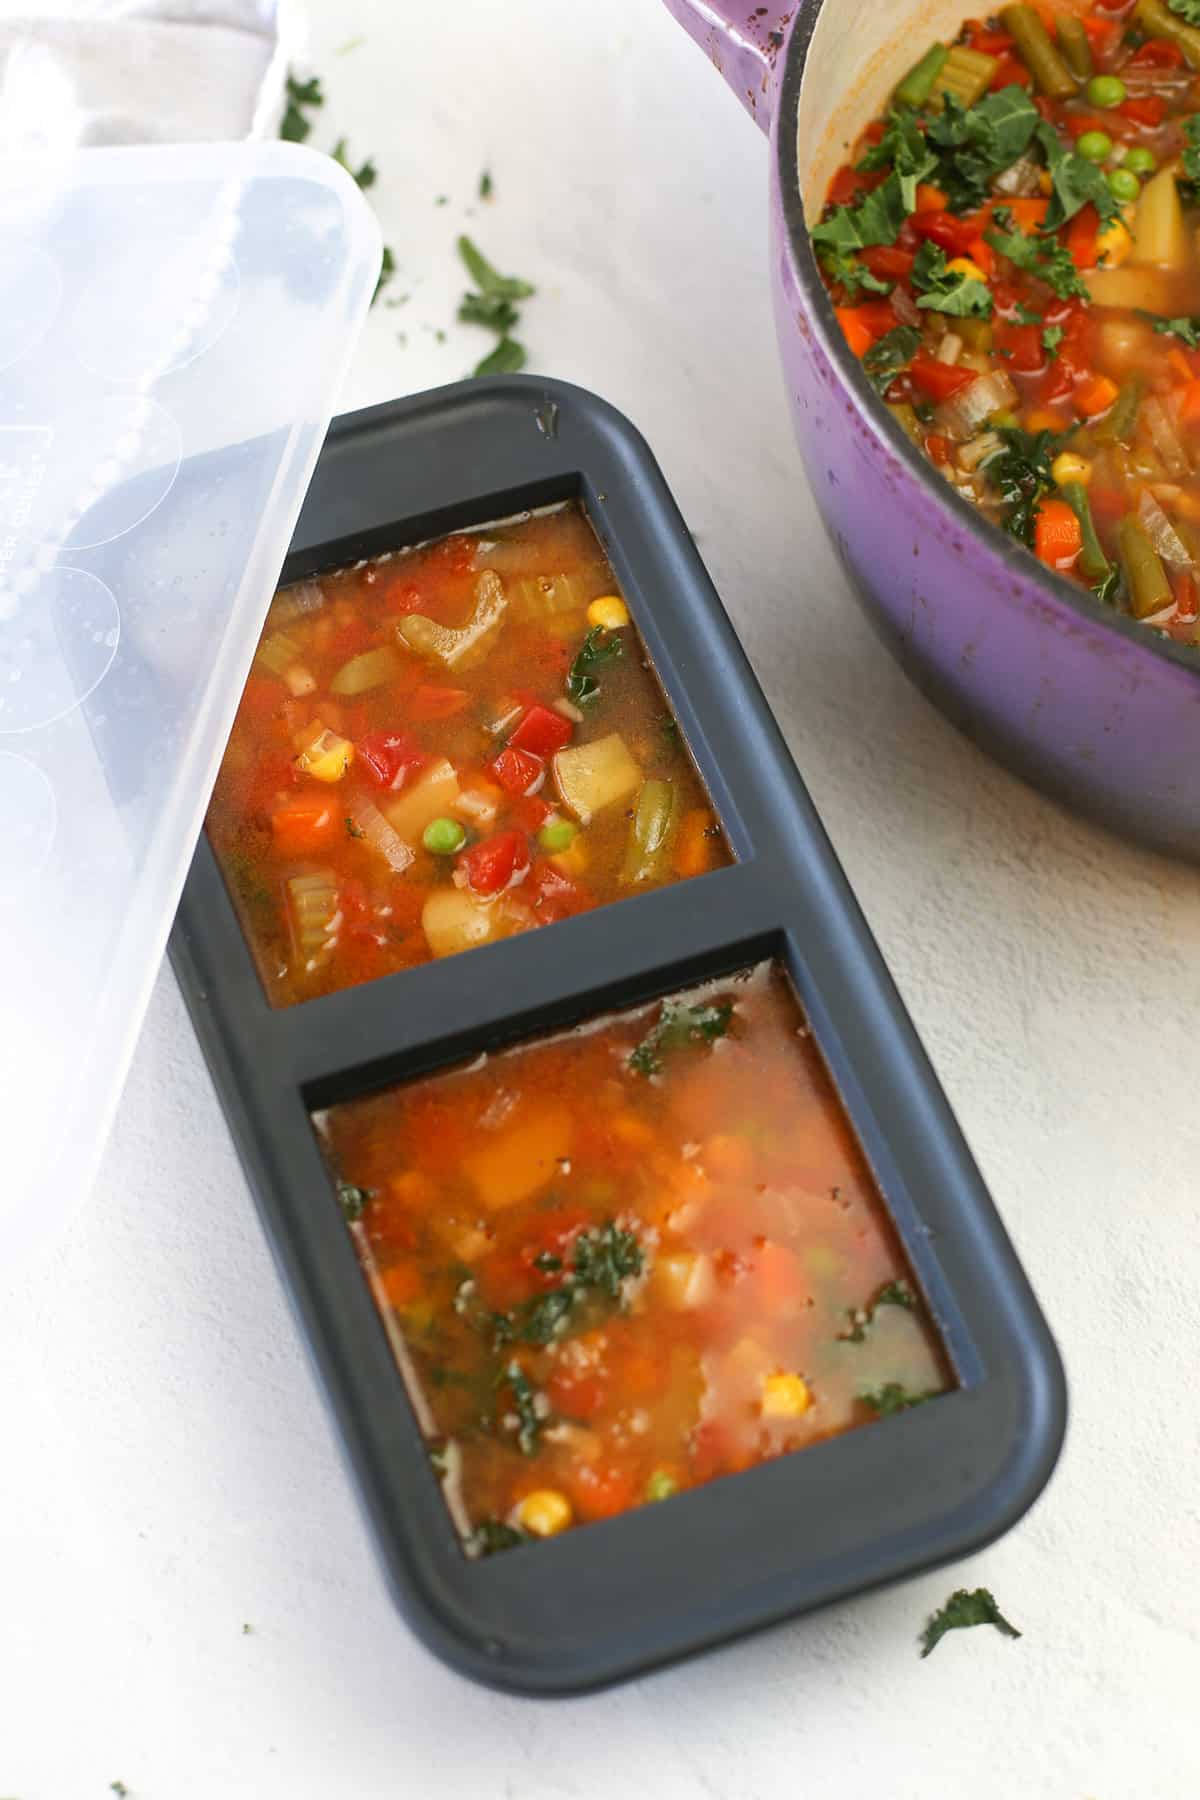 Veggie soup in Souper Cubes ready for the freezer.